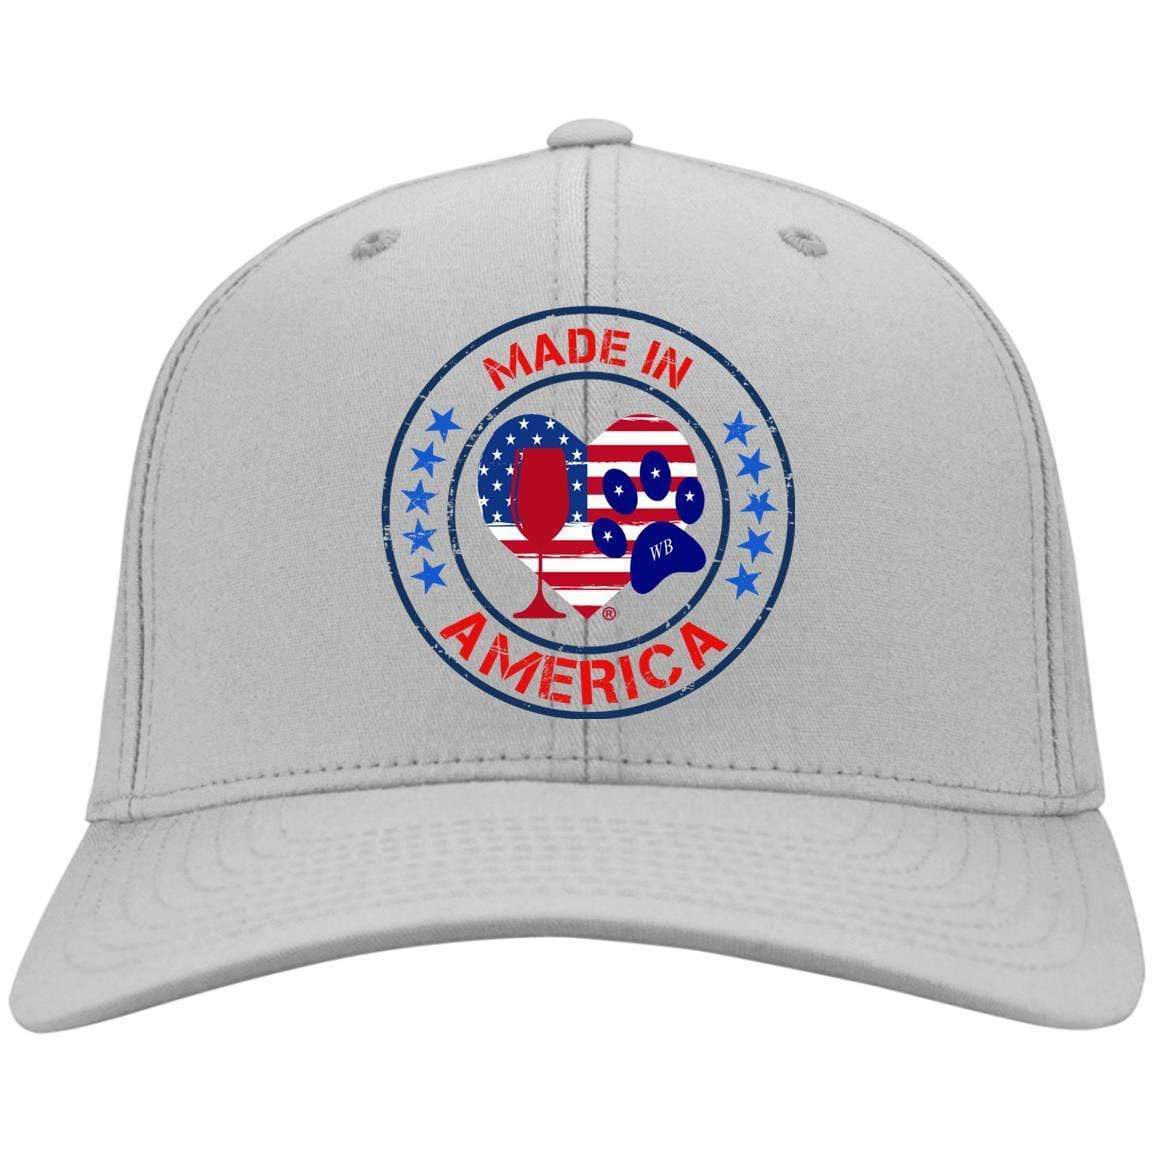 Hats Silver / One Size Winey Bitches Co "Made In America" Embroidered Twill Cap WineyBitchesCo